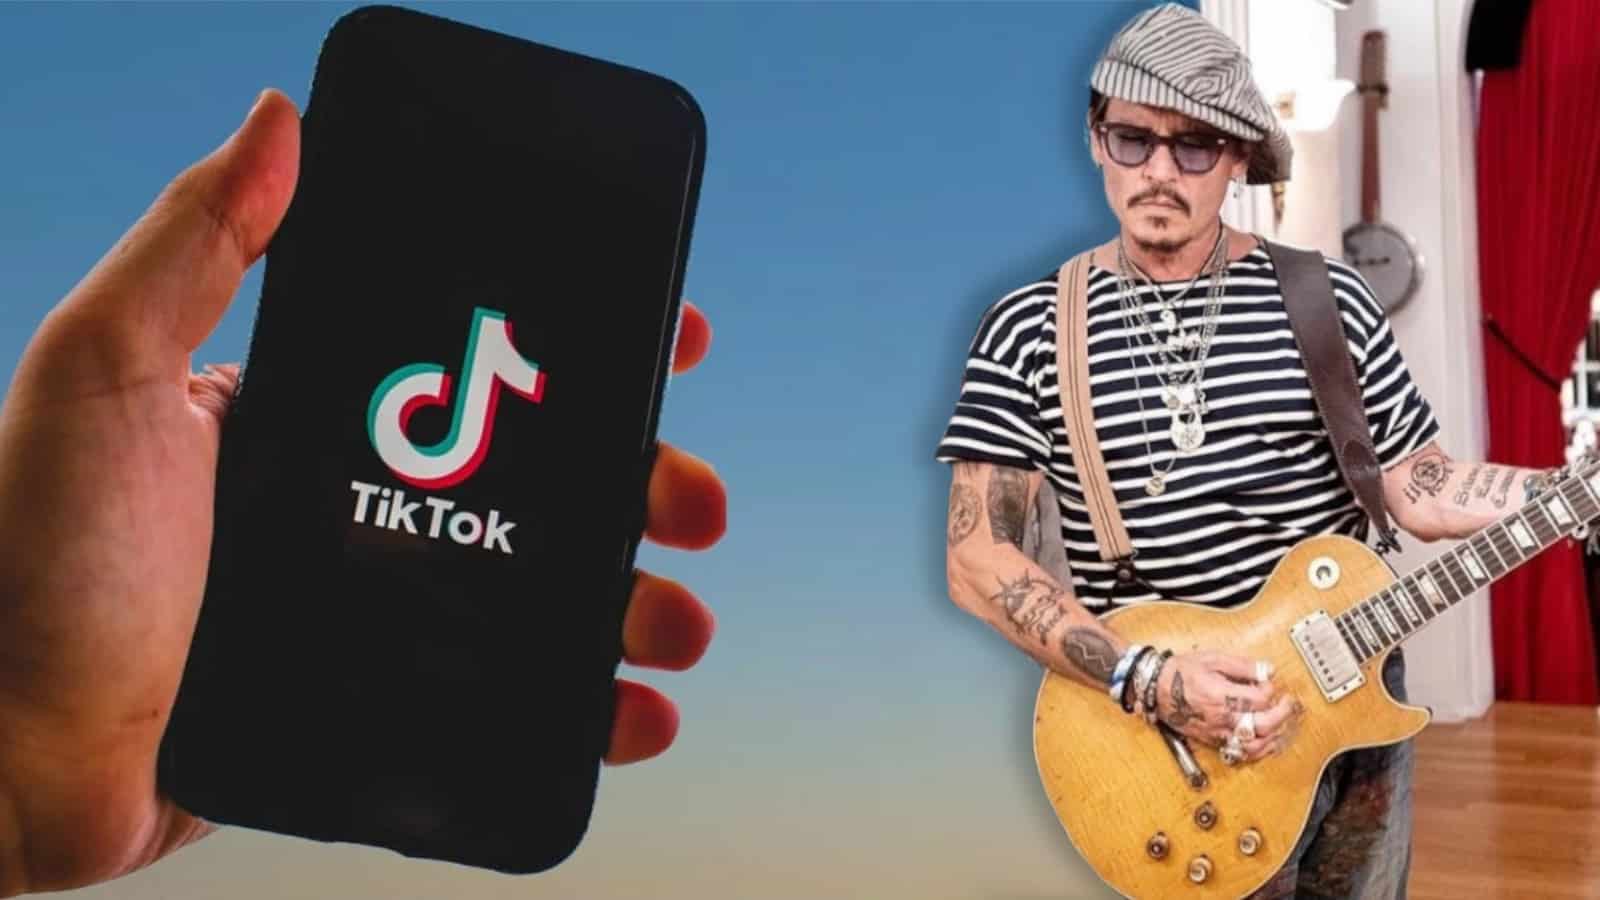 Hand holding a phone displaying the tiktok logo next to an image of johnny depp